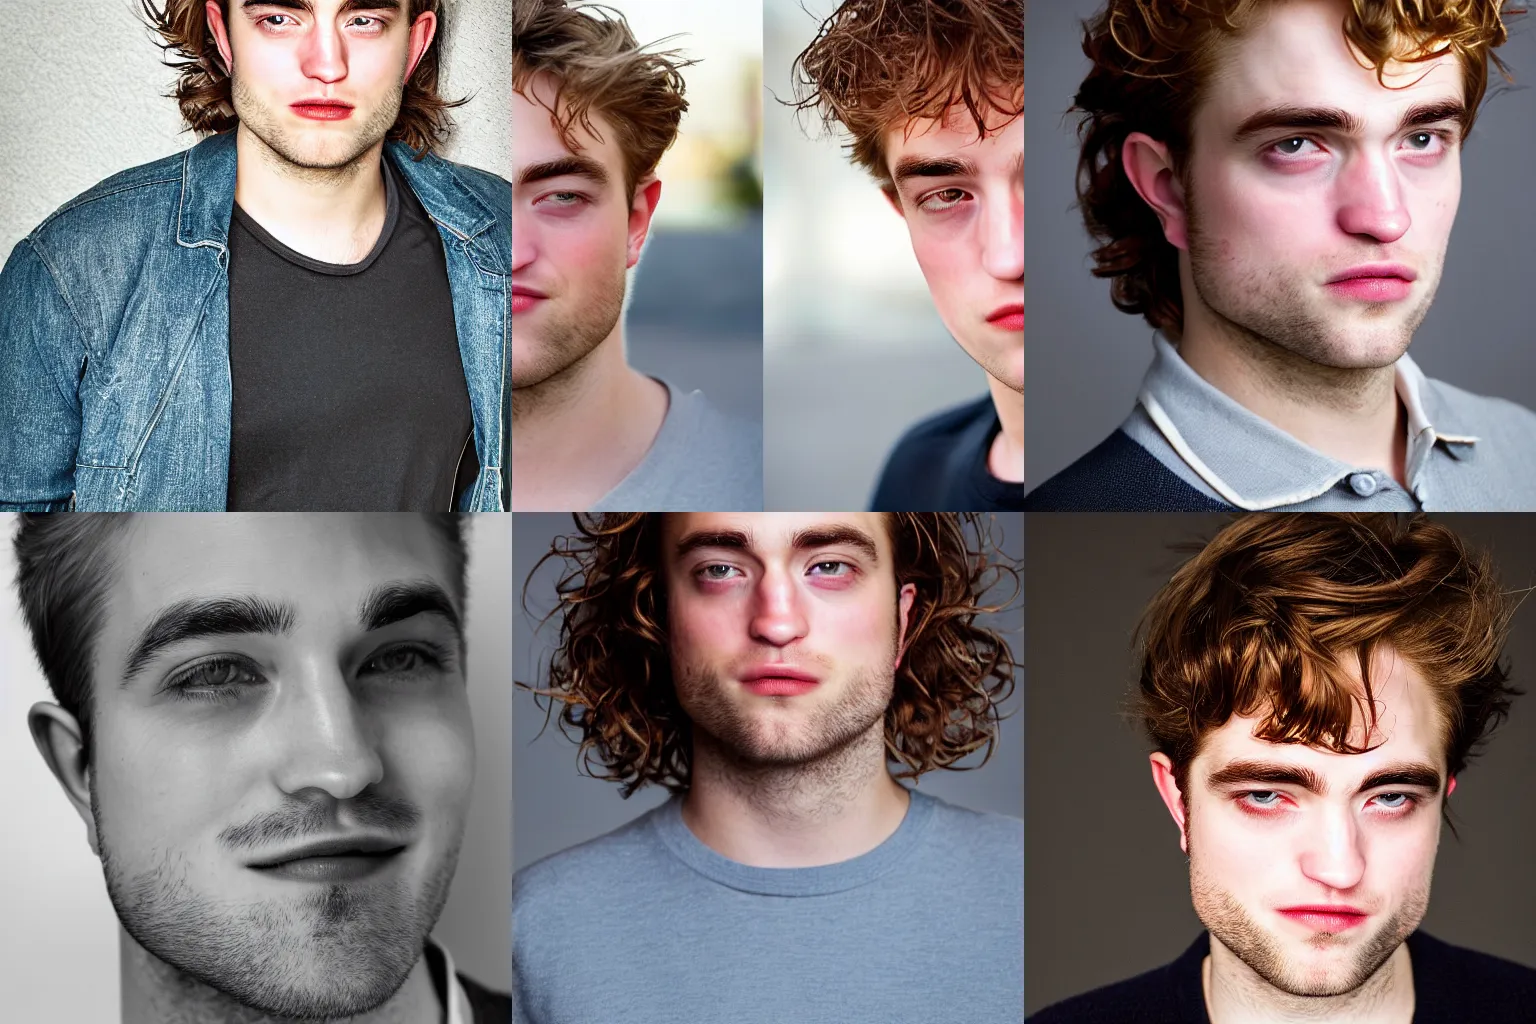 Prompt: closeup headshot photo of the young adult who is the combination of Robert Pattinson and Danny DeVito